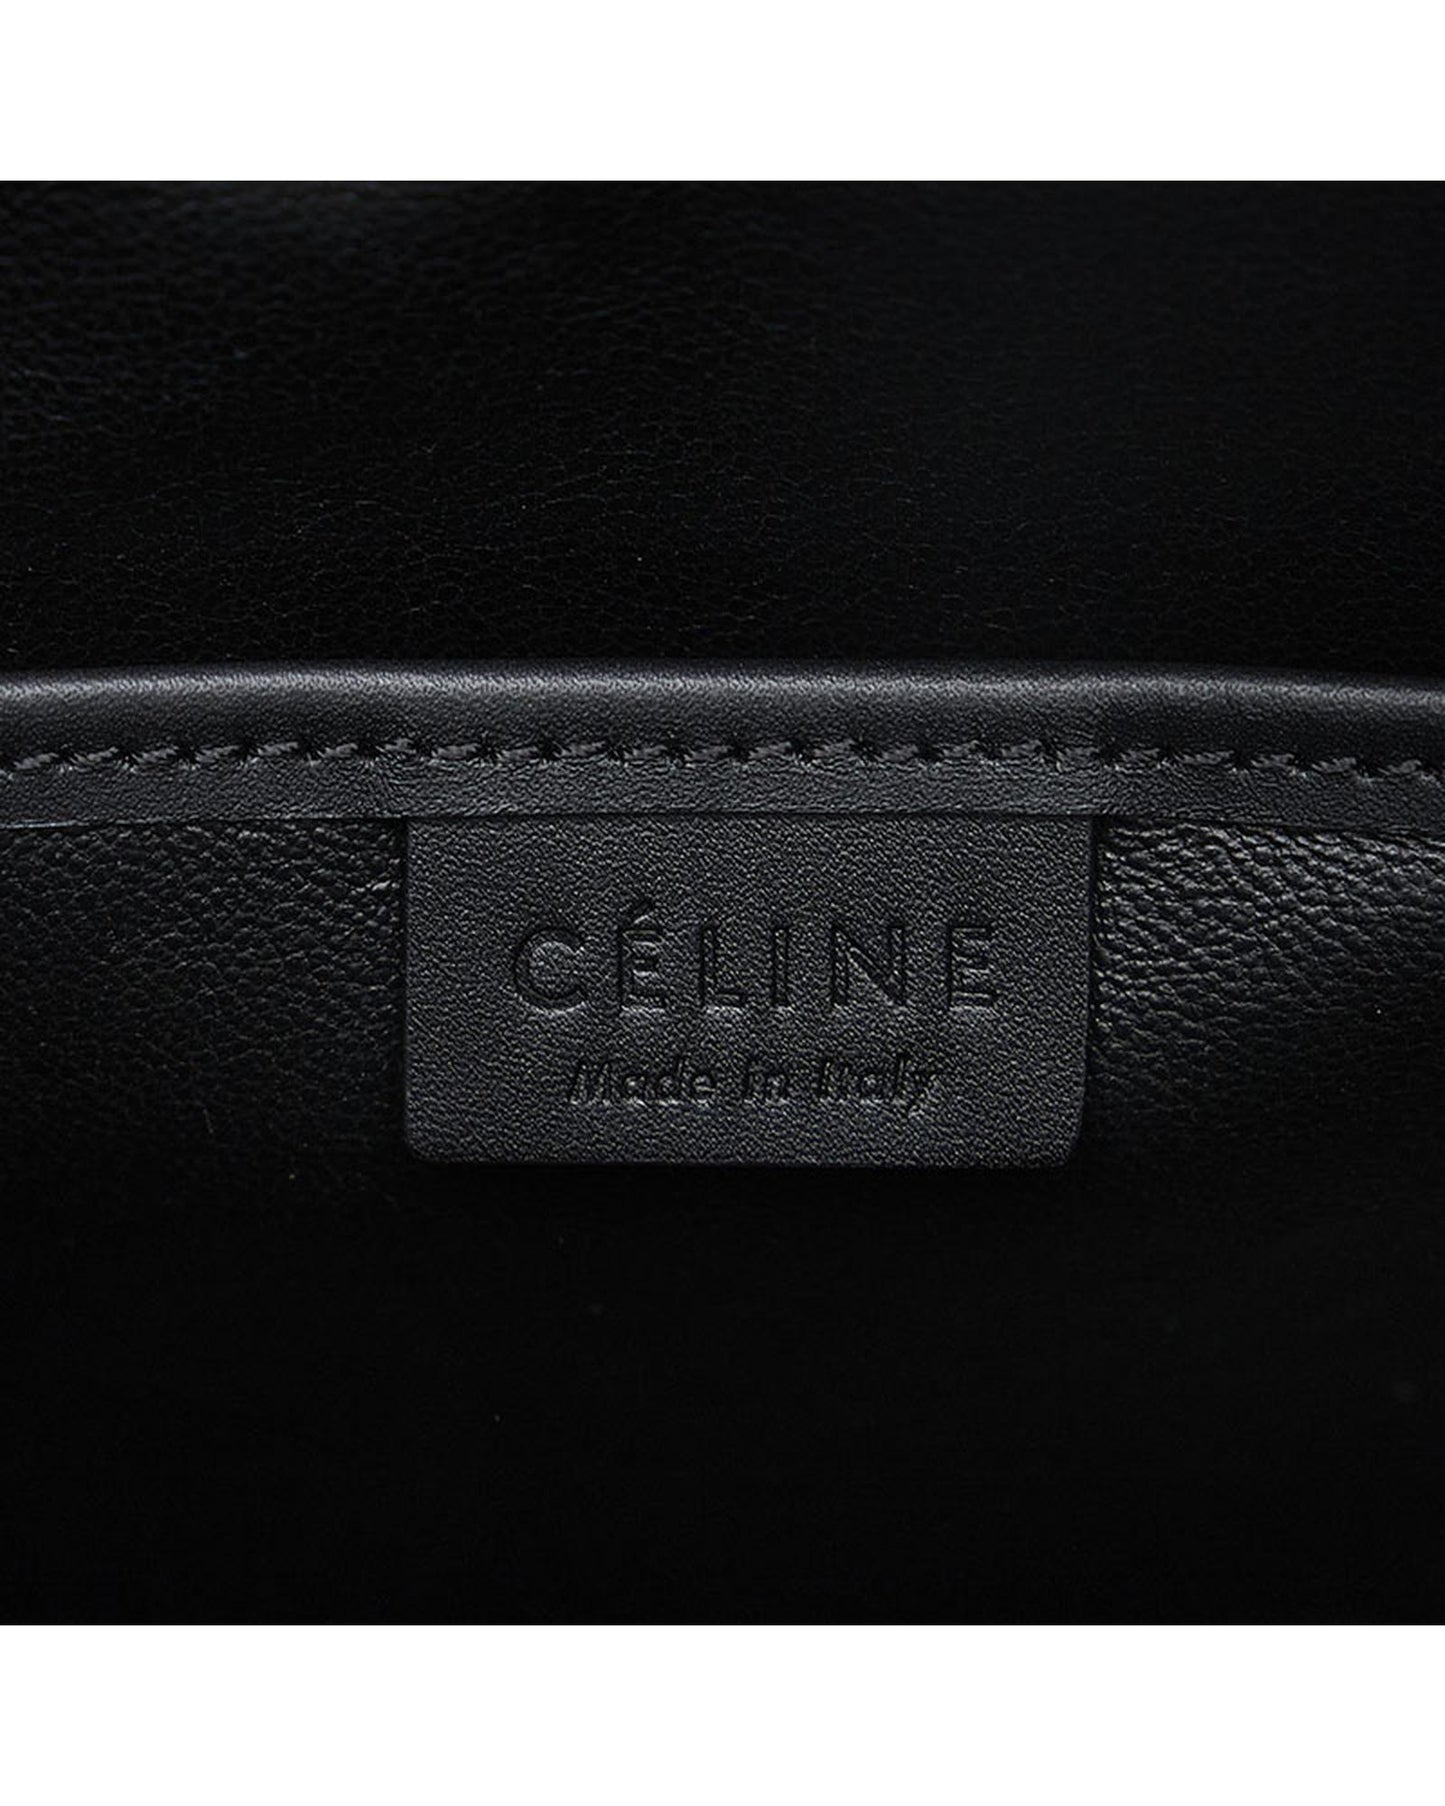 Celine Women's Tricolor Leather Nano Luggage Bag by Celine in Red